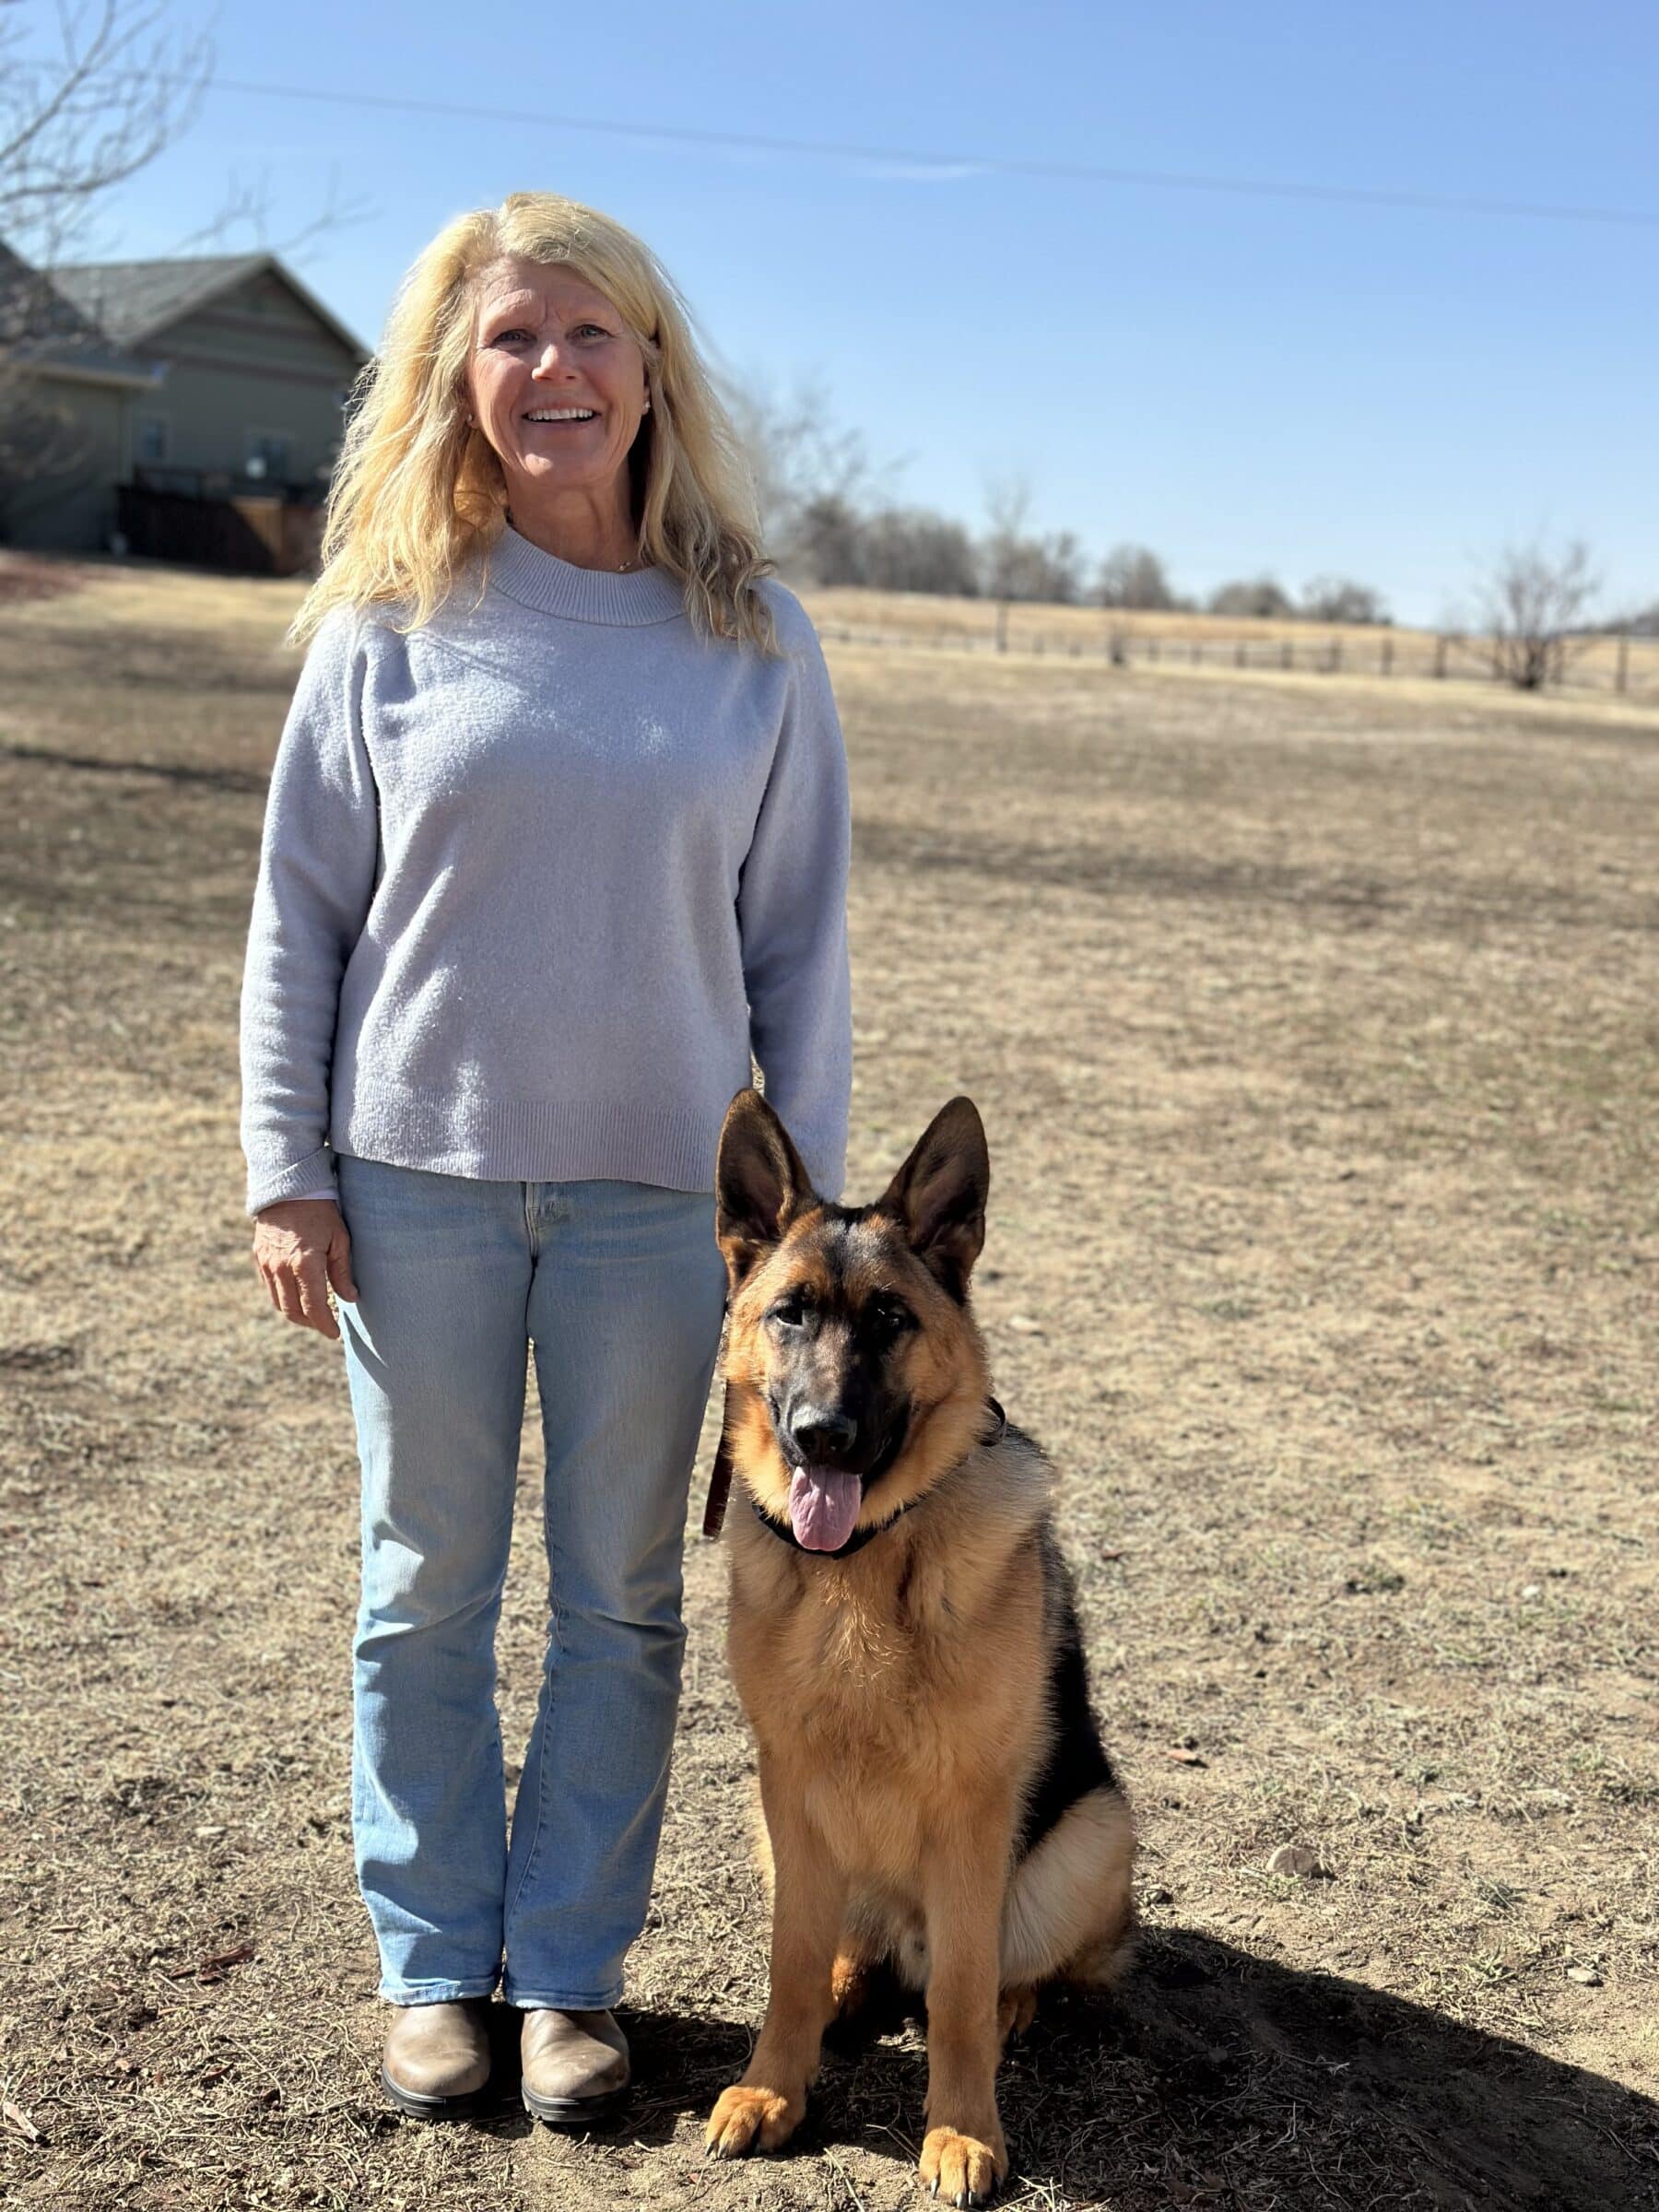 german shepherd standing next to a middle aged blond lady with jeans and grey shirt on